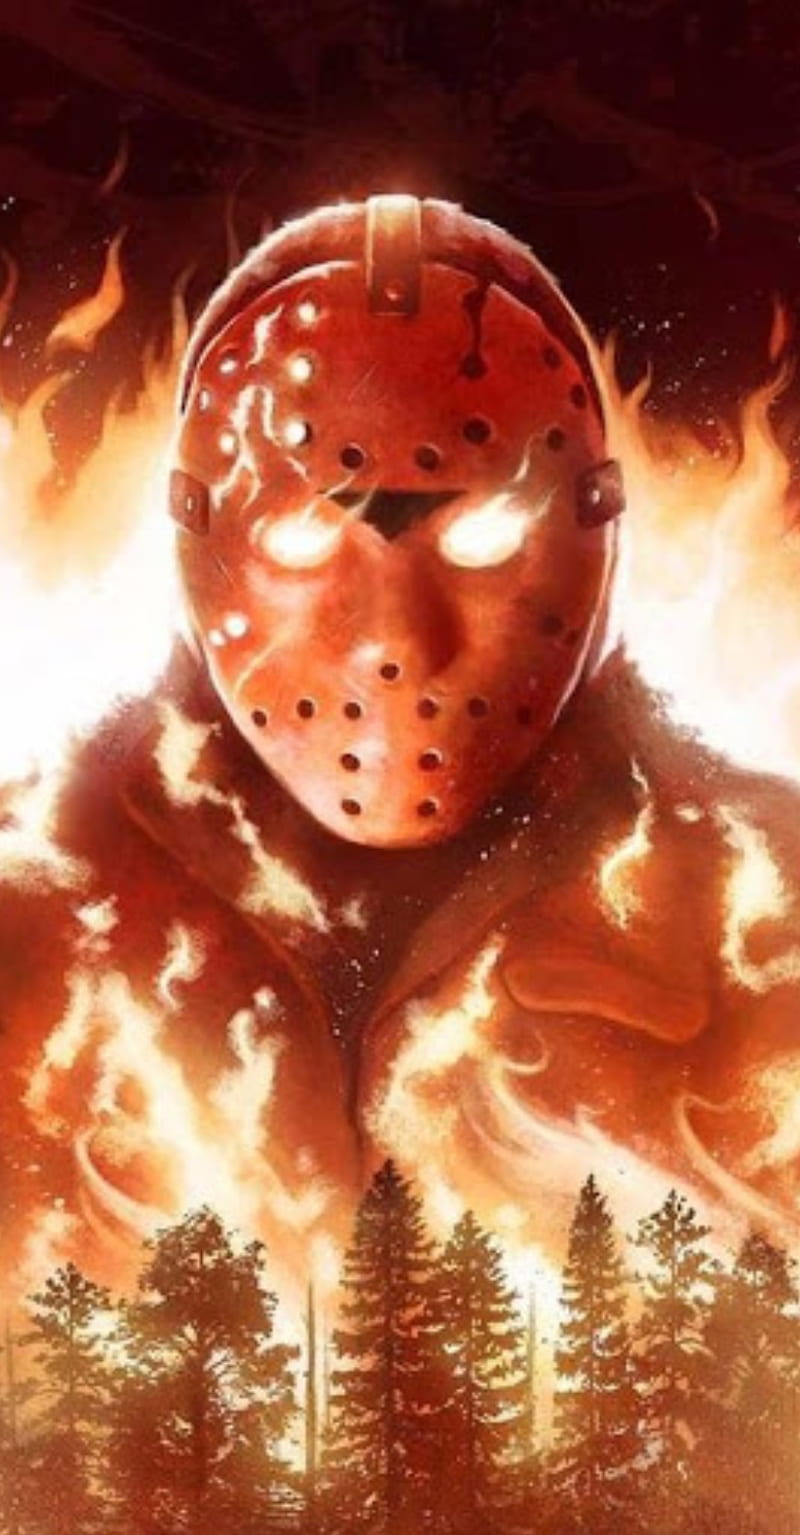 Jason Friday The 13th iPhone Wallpapers  Wallpaper Cave